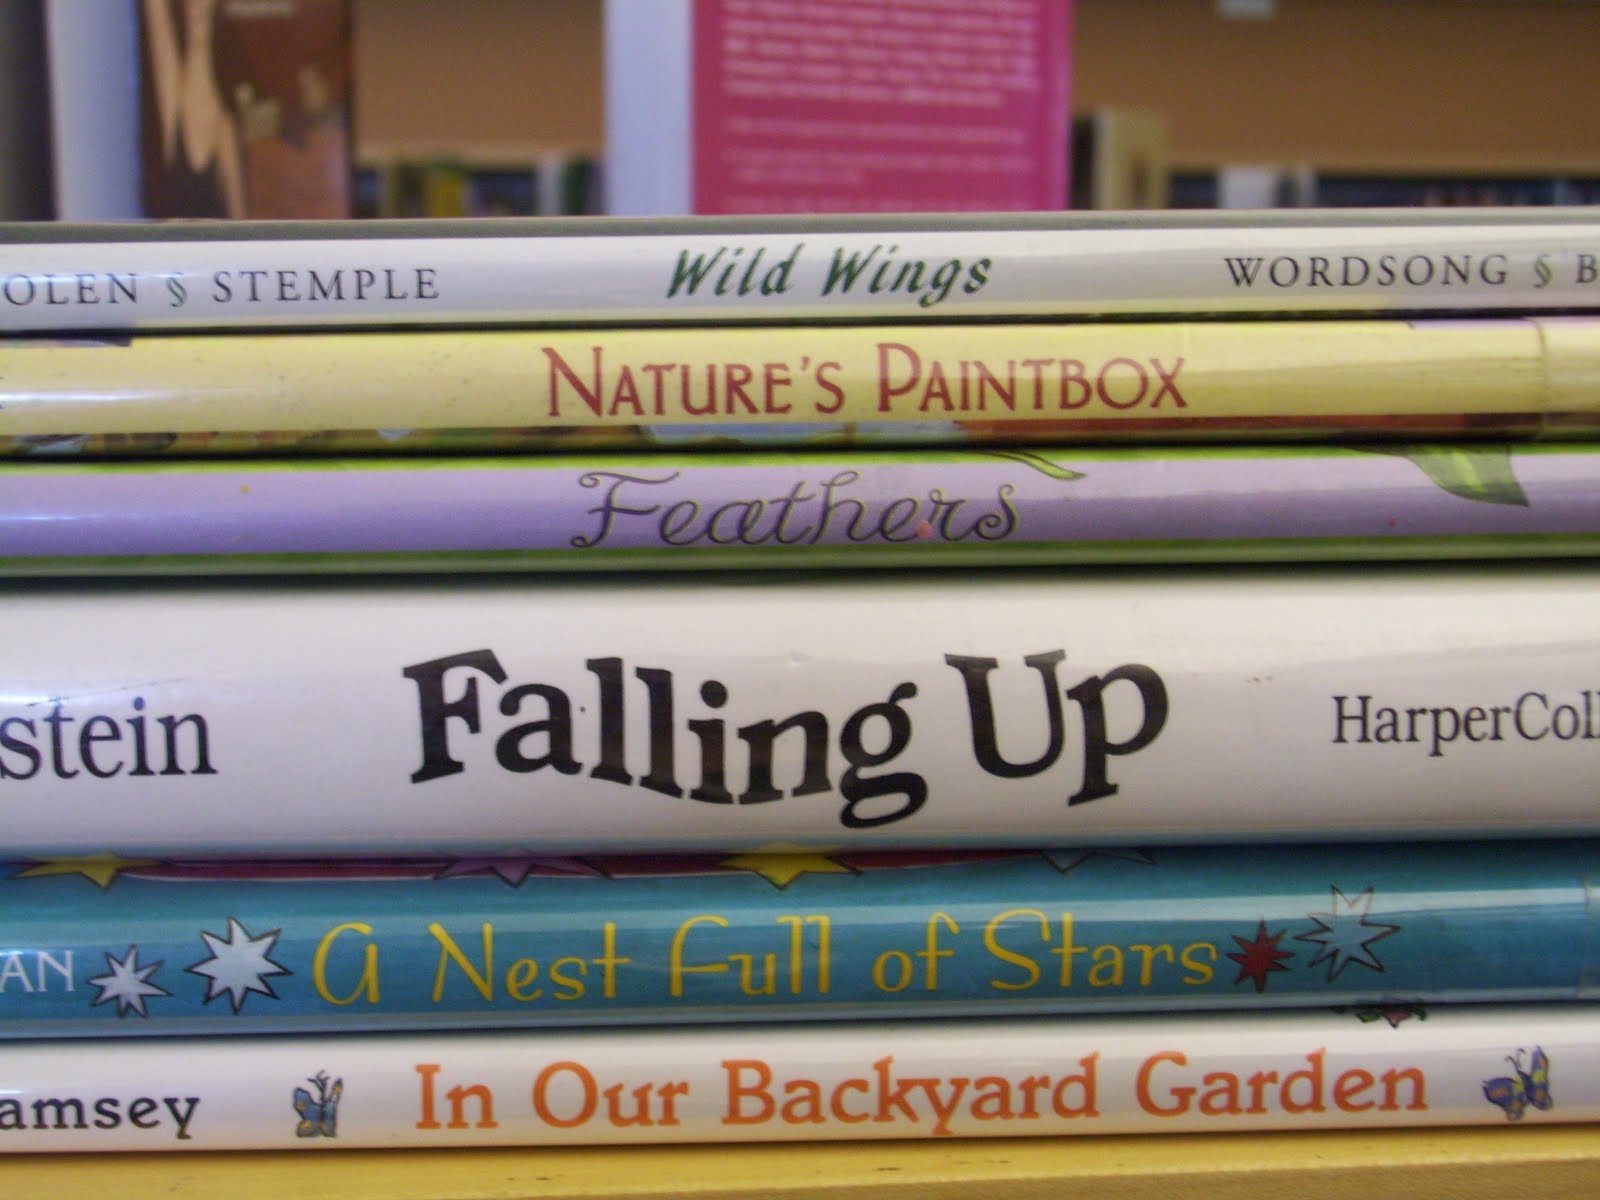 family-book-bag-book-spine-poetry